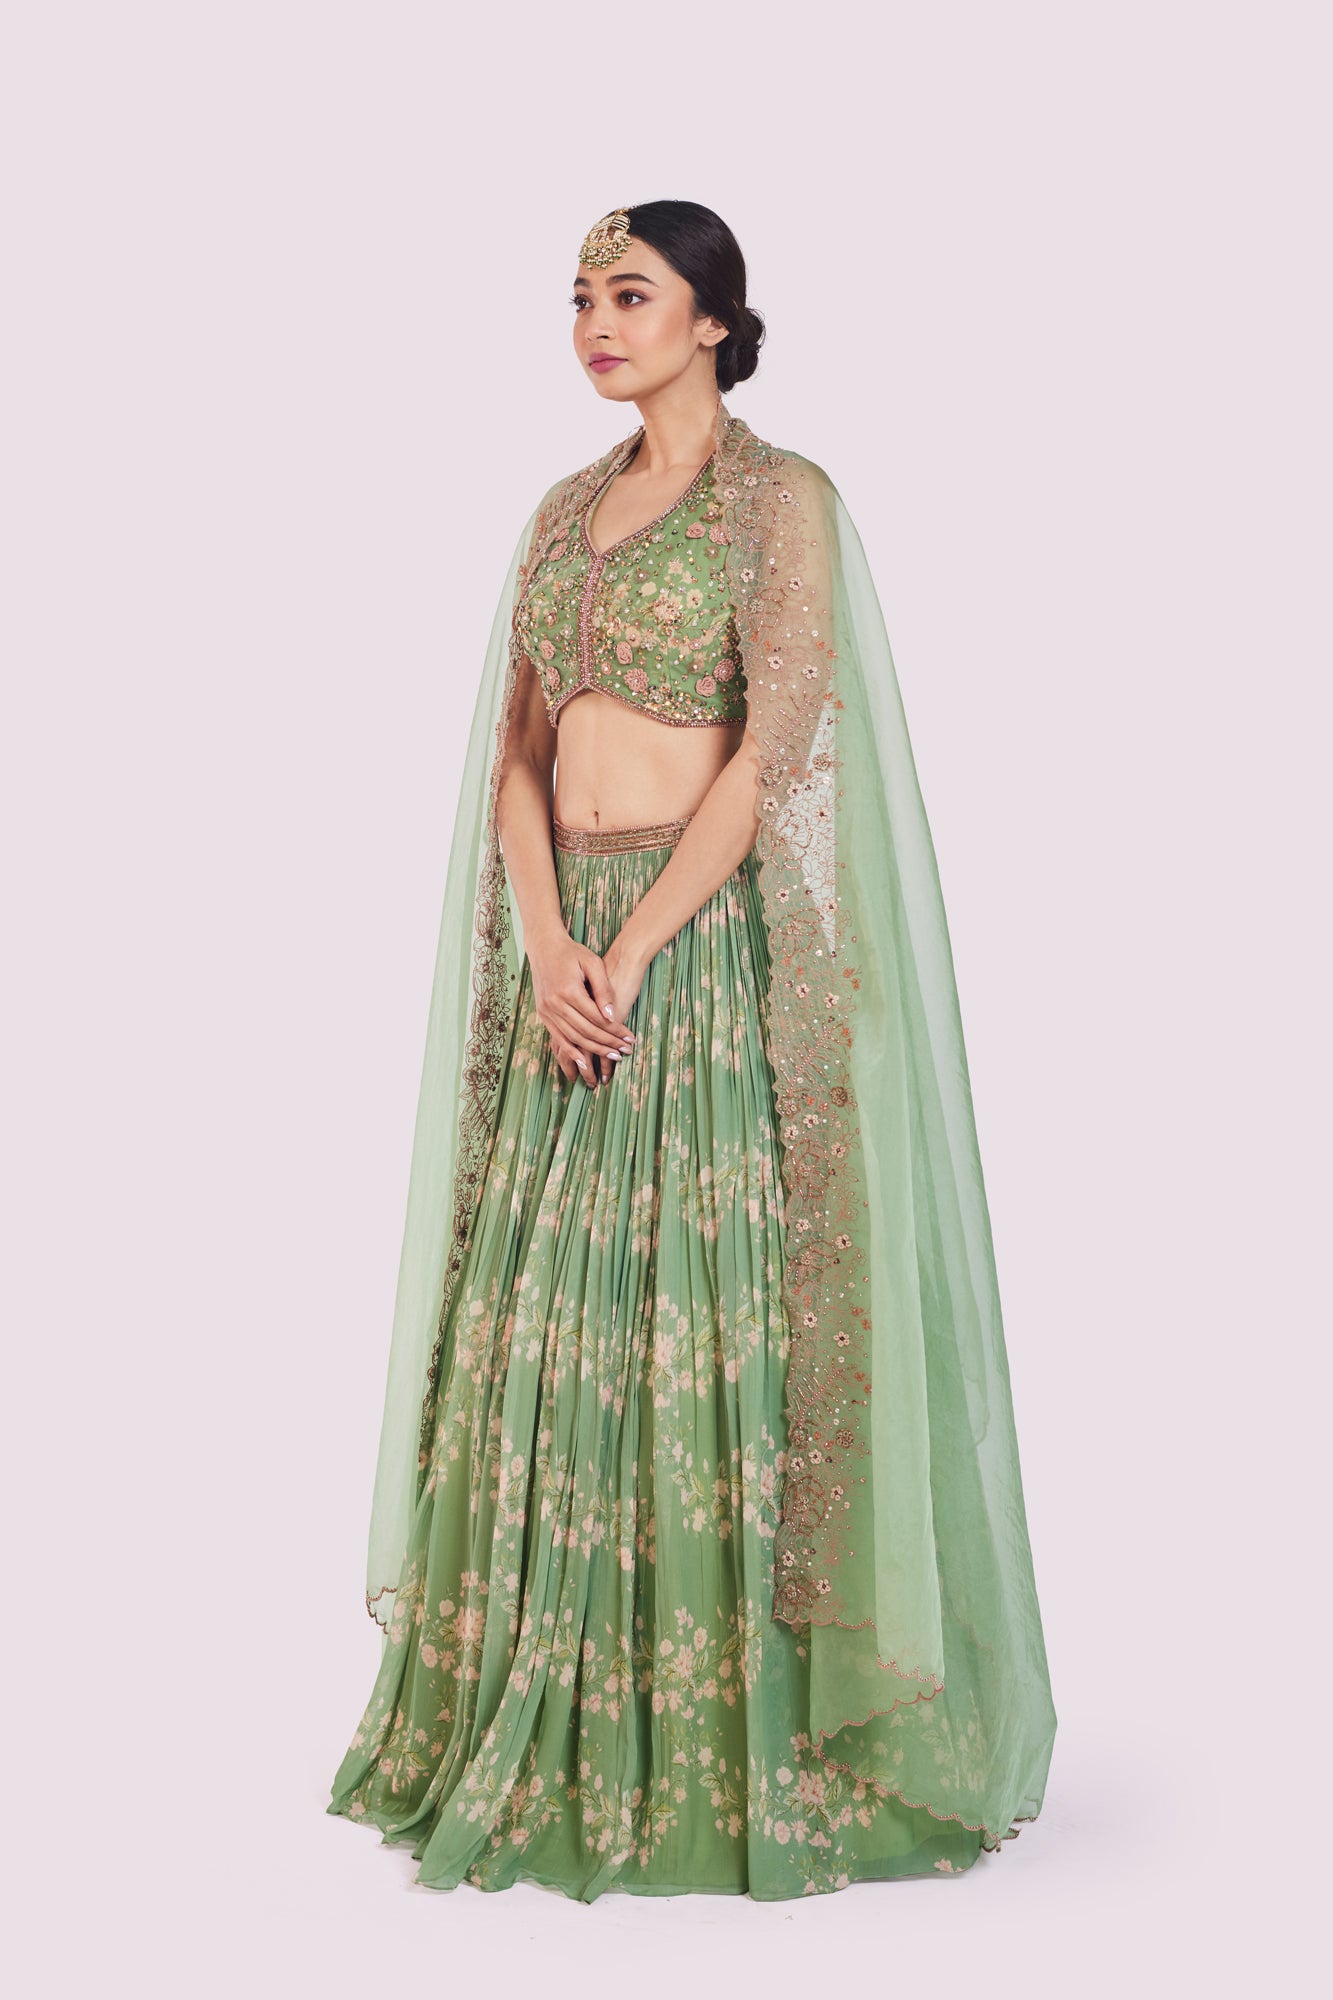 Buy sea green printed embellished georgette lehenga online in USA. Shop the best and latest designs in embroidered sarees, designer sarees, Anarkali suit, lehengas, sharara suits for weddings and special occasions from Pure Elegance Indian fashion store in USA.-lehenga